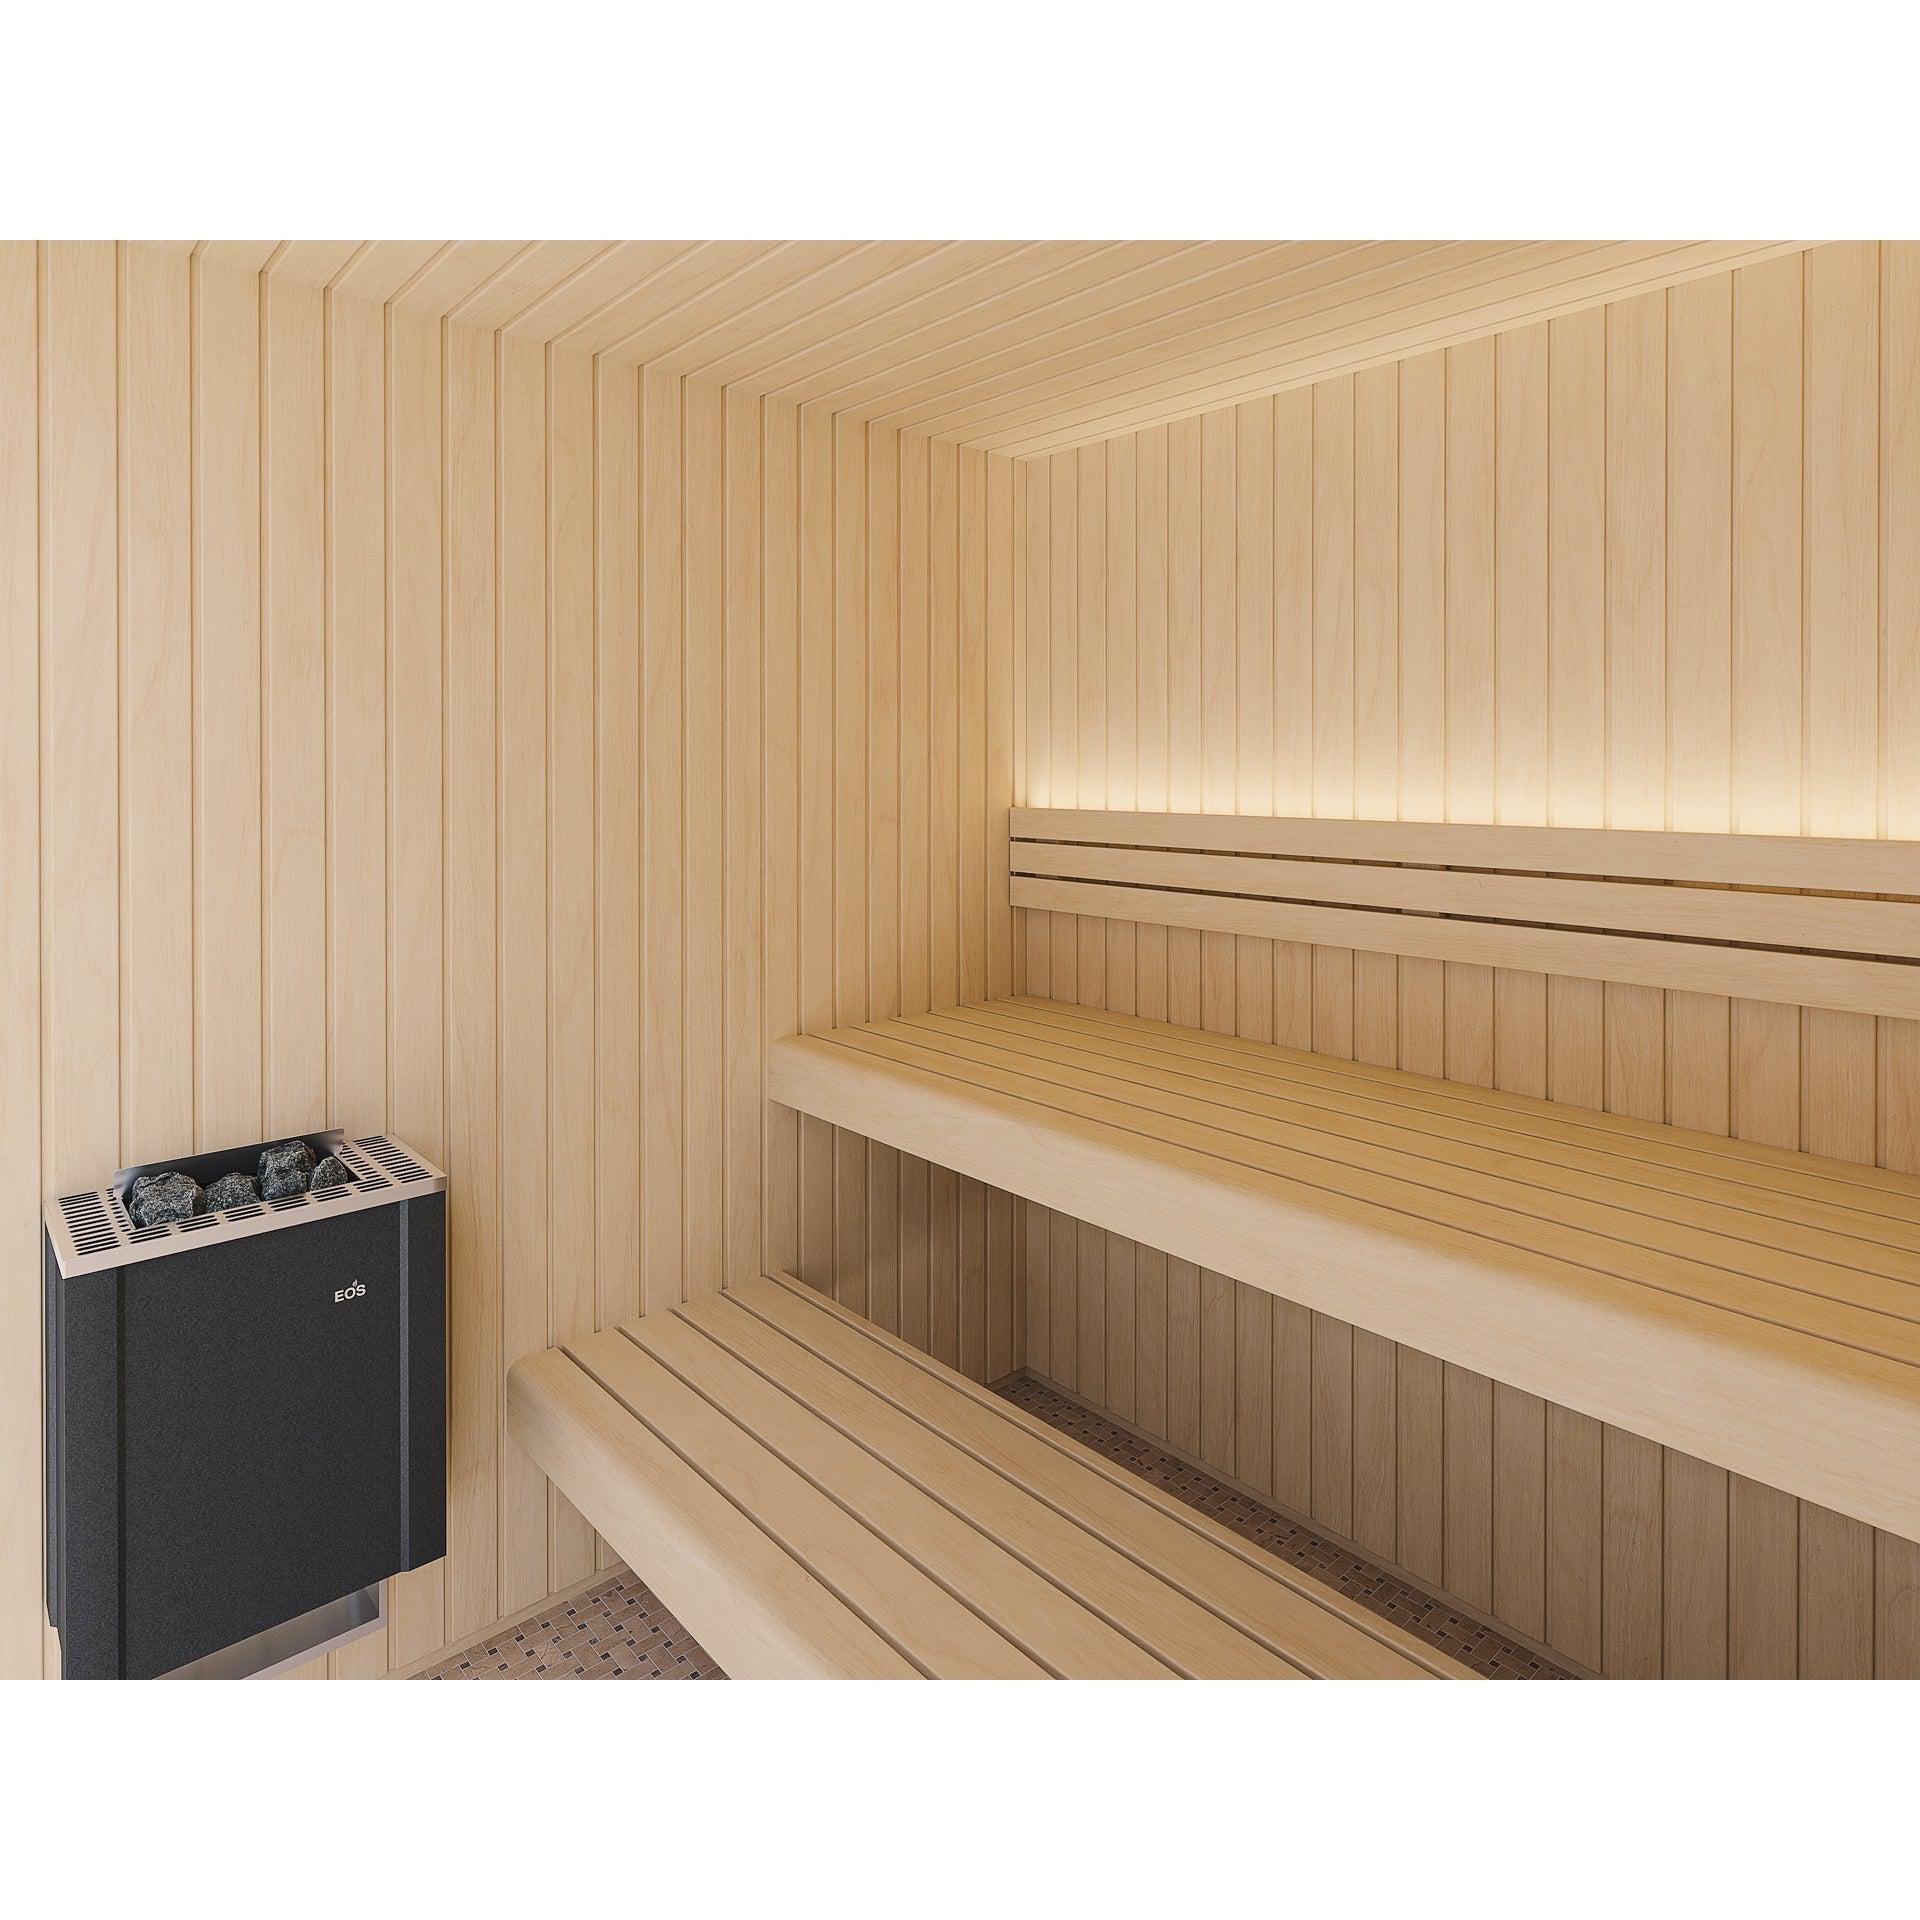 Emma Glass Indoor Home Sauna Kit - Purely Relaxation